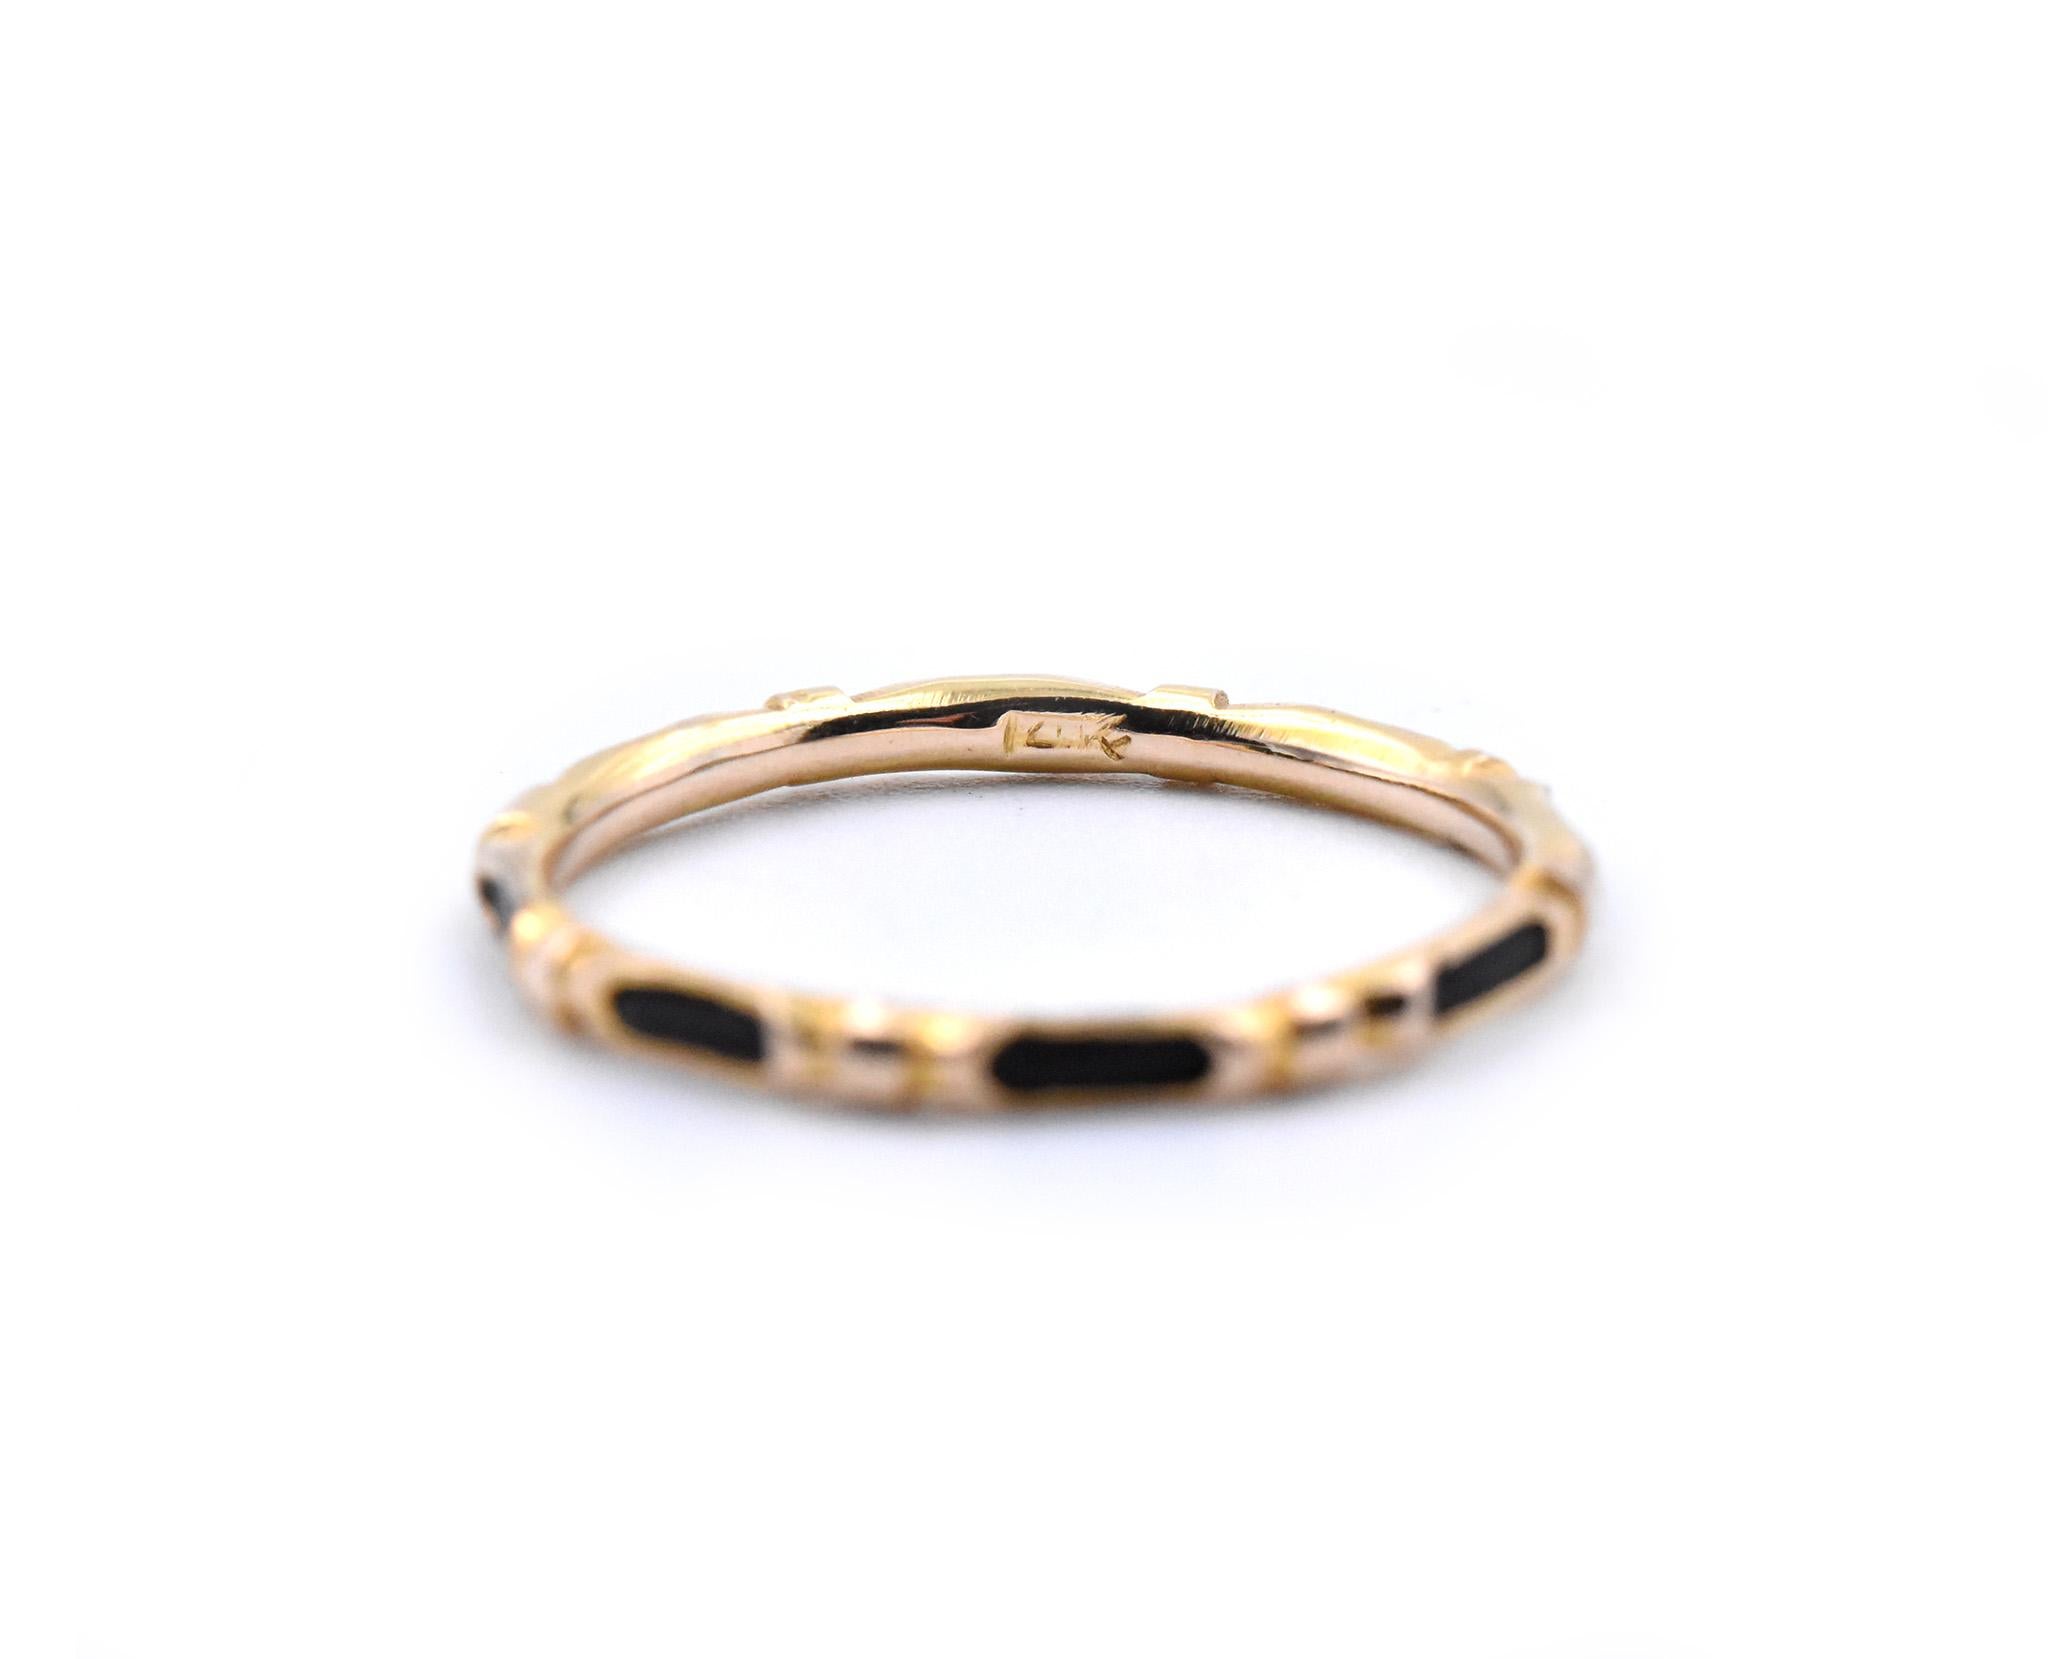 Women's or Men's 14 Karat Yellow Gold Band Ring with Black Inner Band For Sale